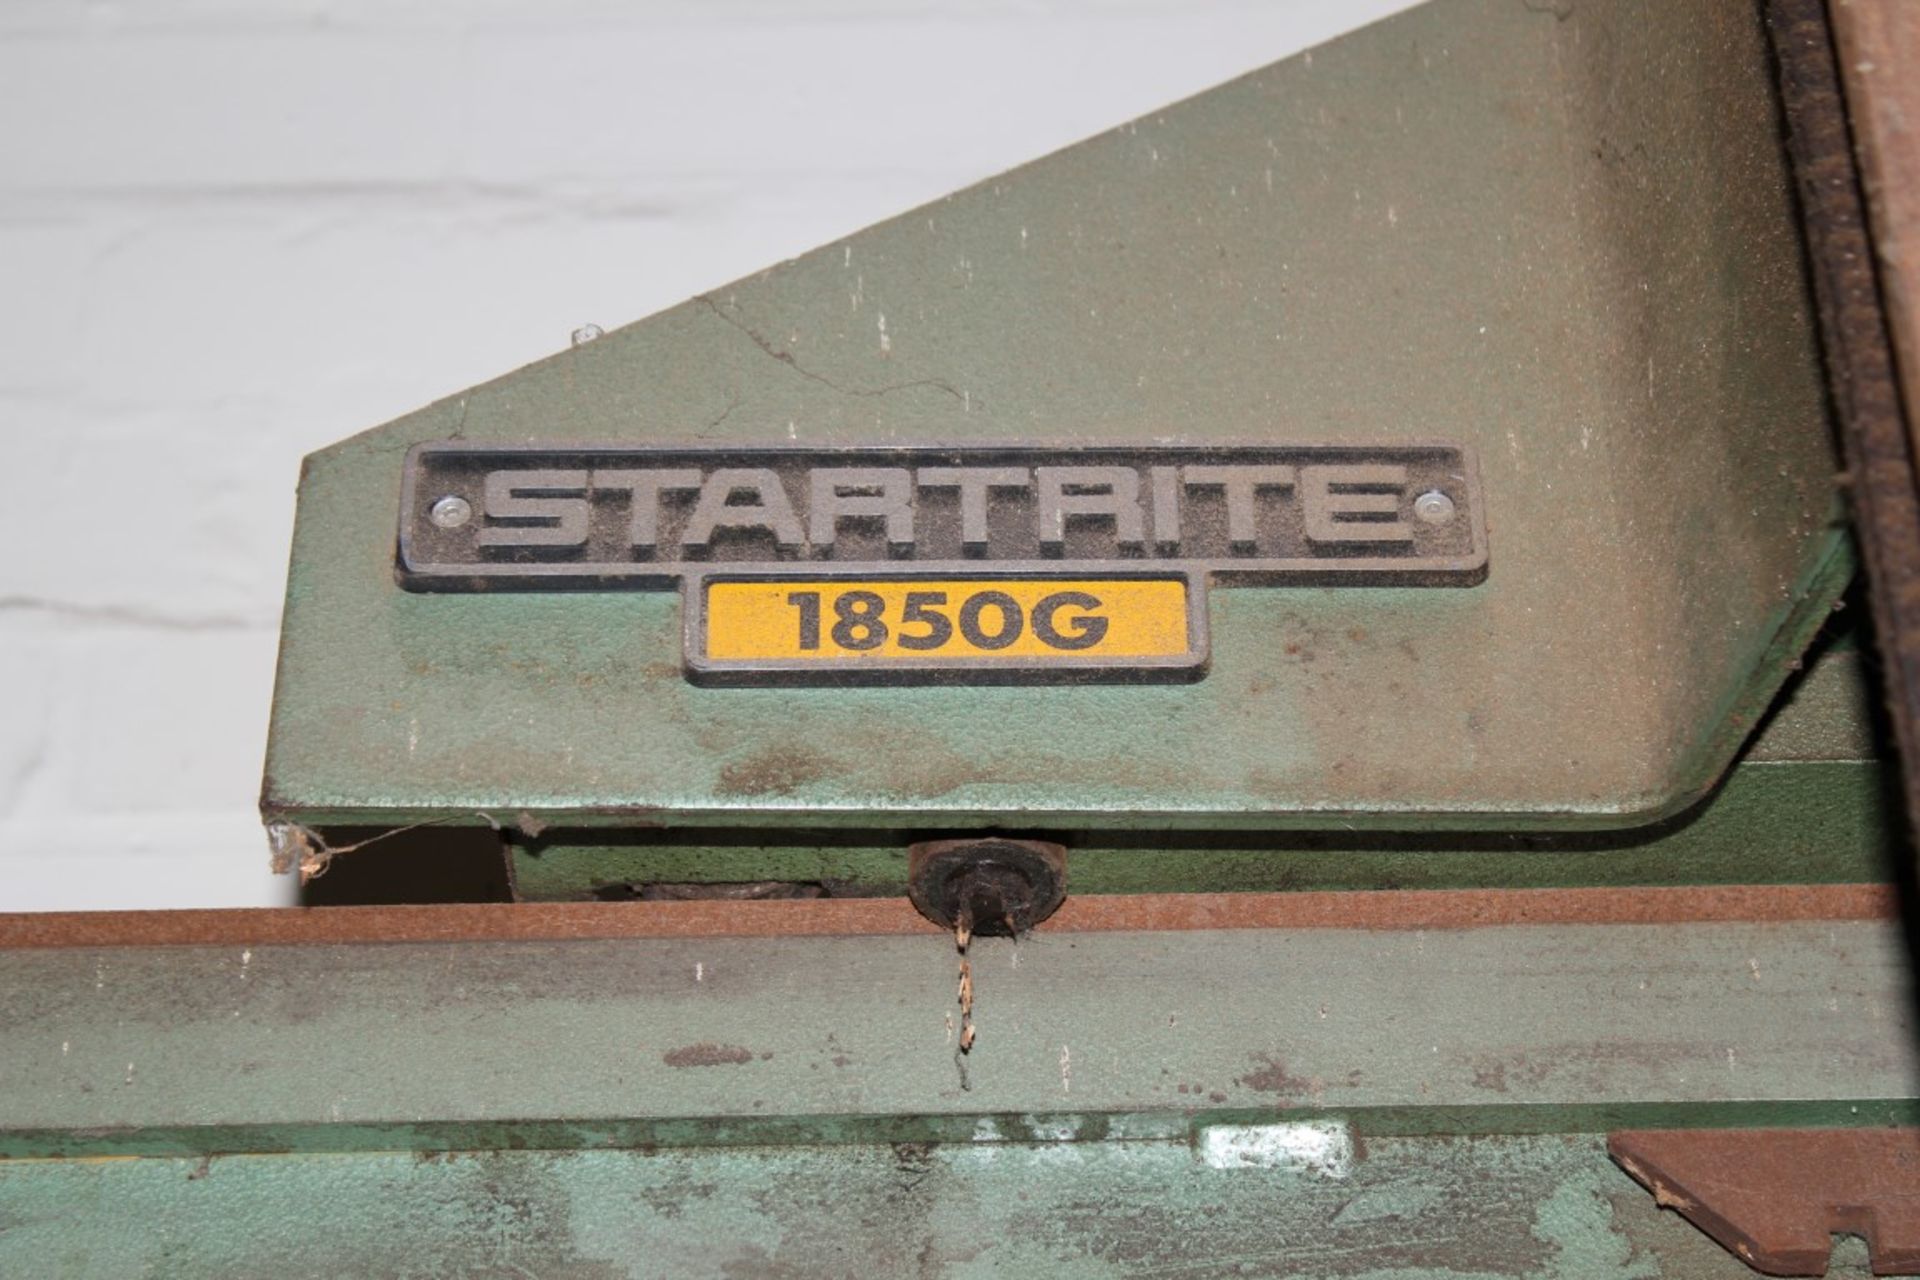 1 x Startrite Harwi 1850G Wood Cutting Vertical Wall Saw - 3 Phase - Working Order - Approx Length - Image 3 of 6